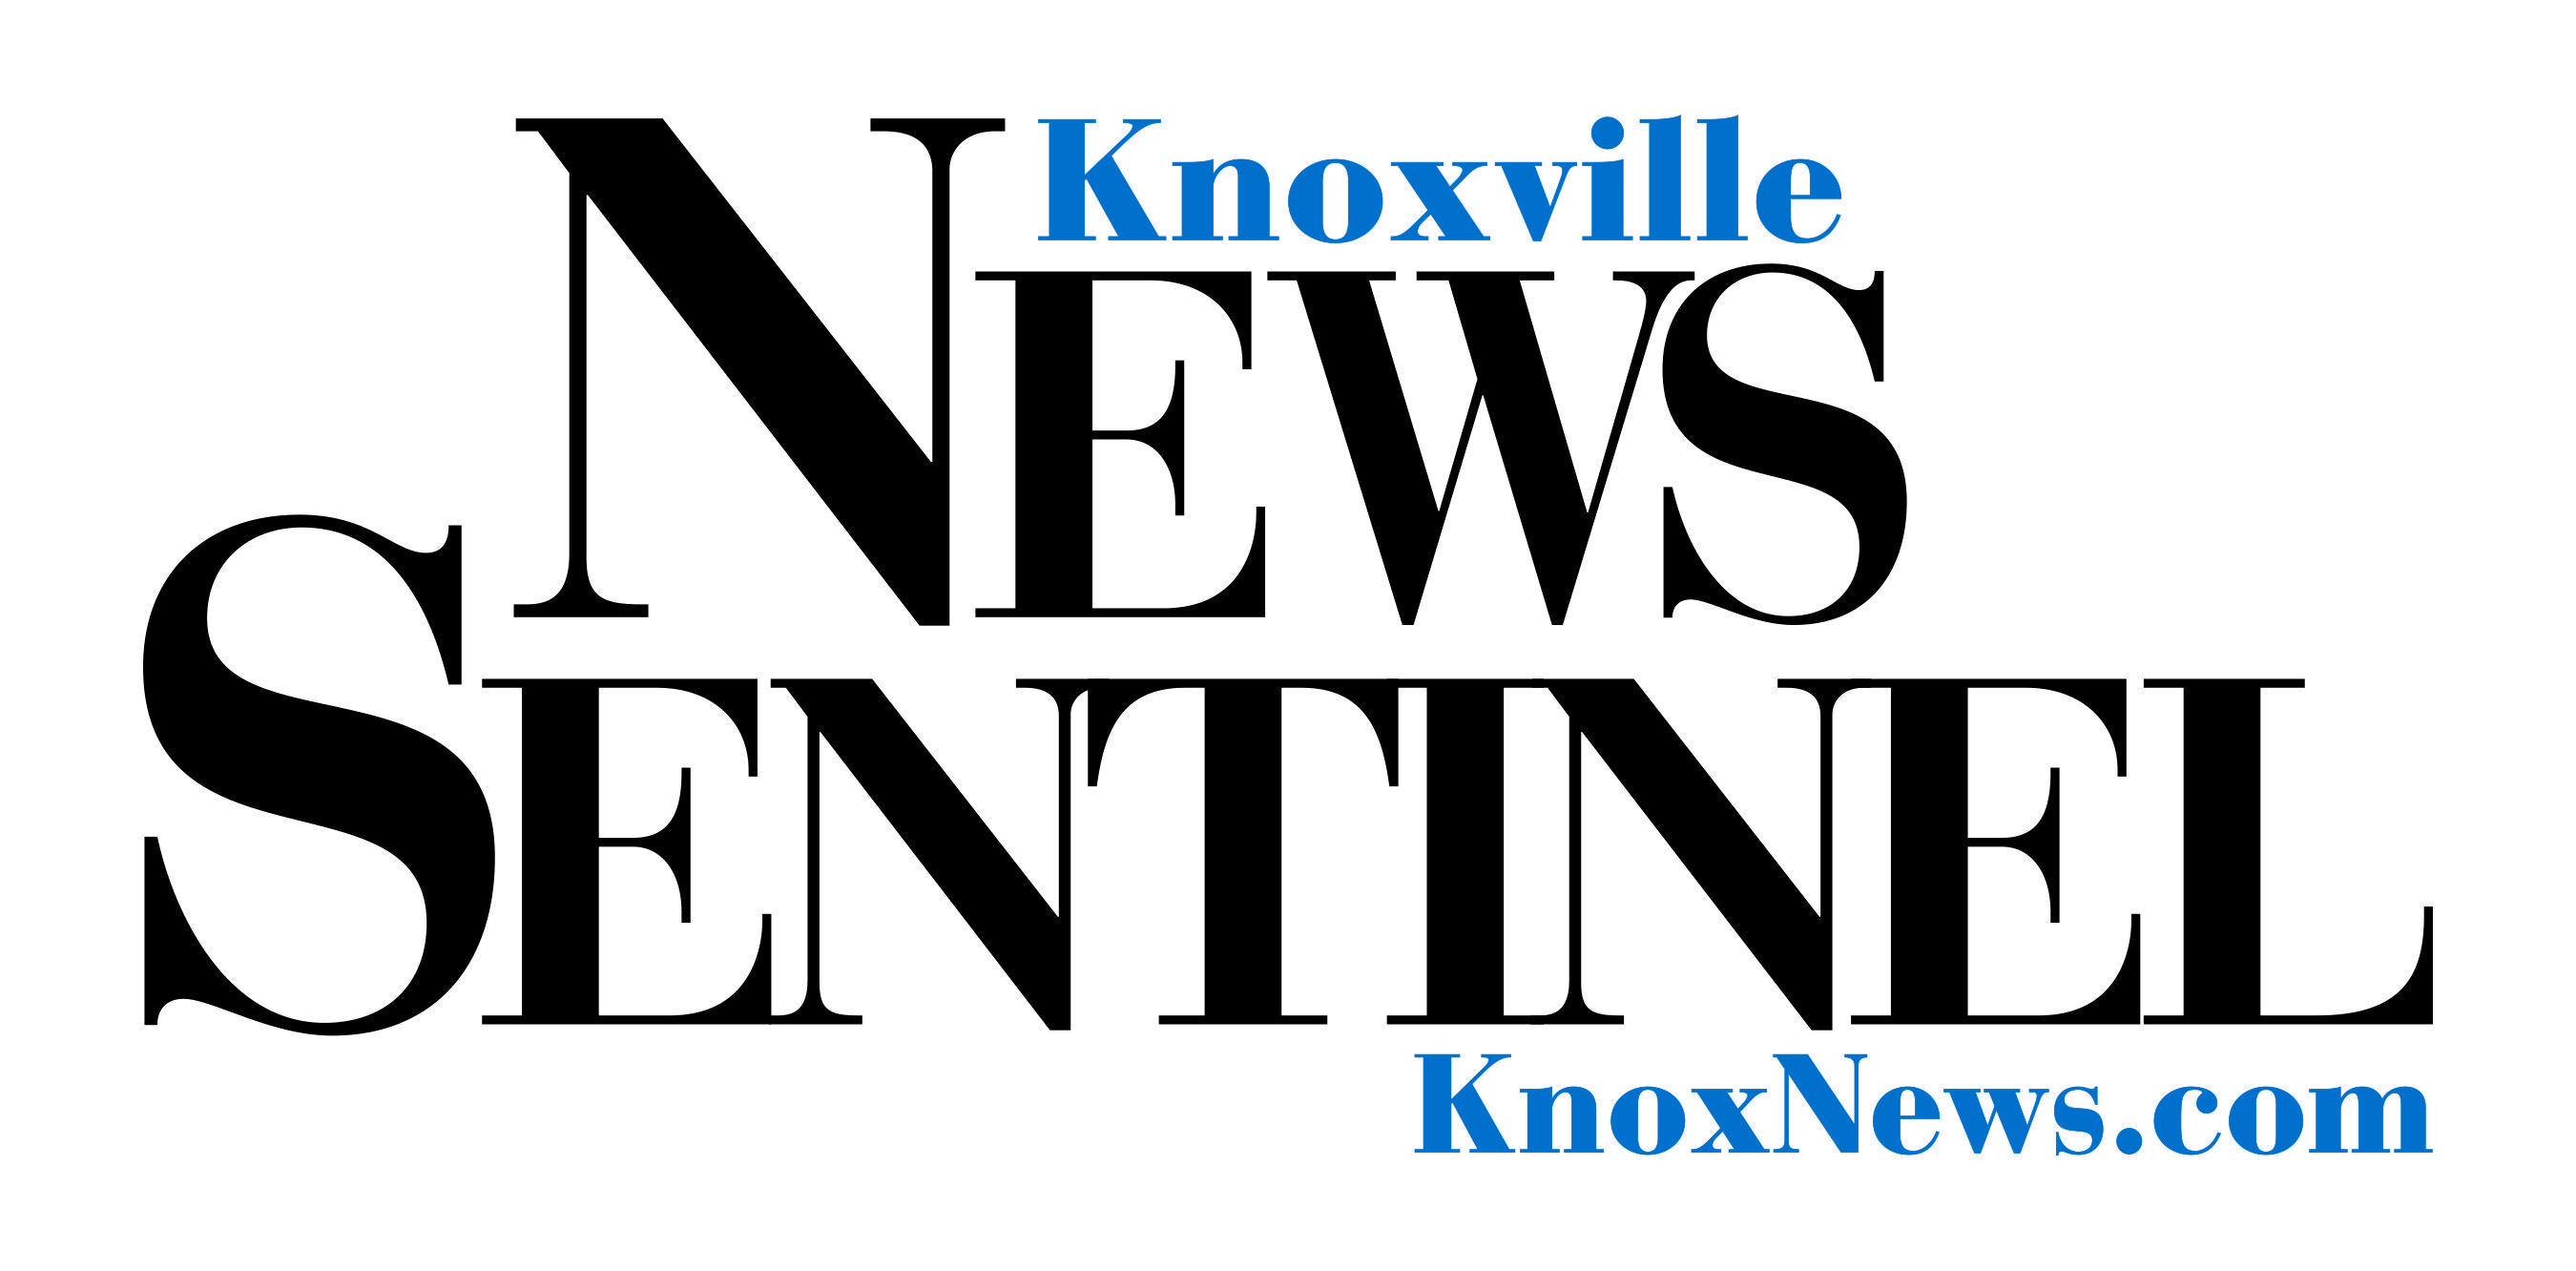 Sentinel Logo - Knoxville News Sentinel Logo - Knoxville Habitat for Humanity